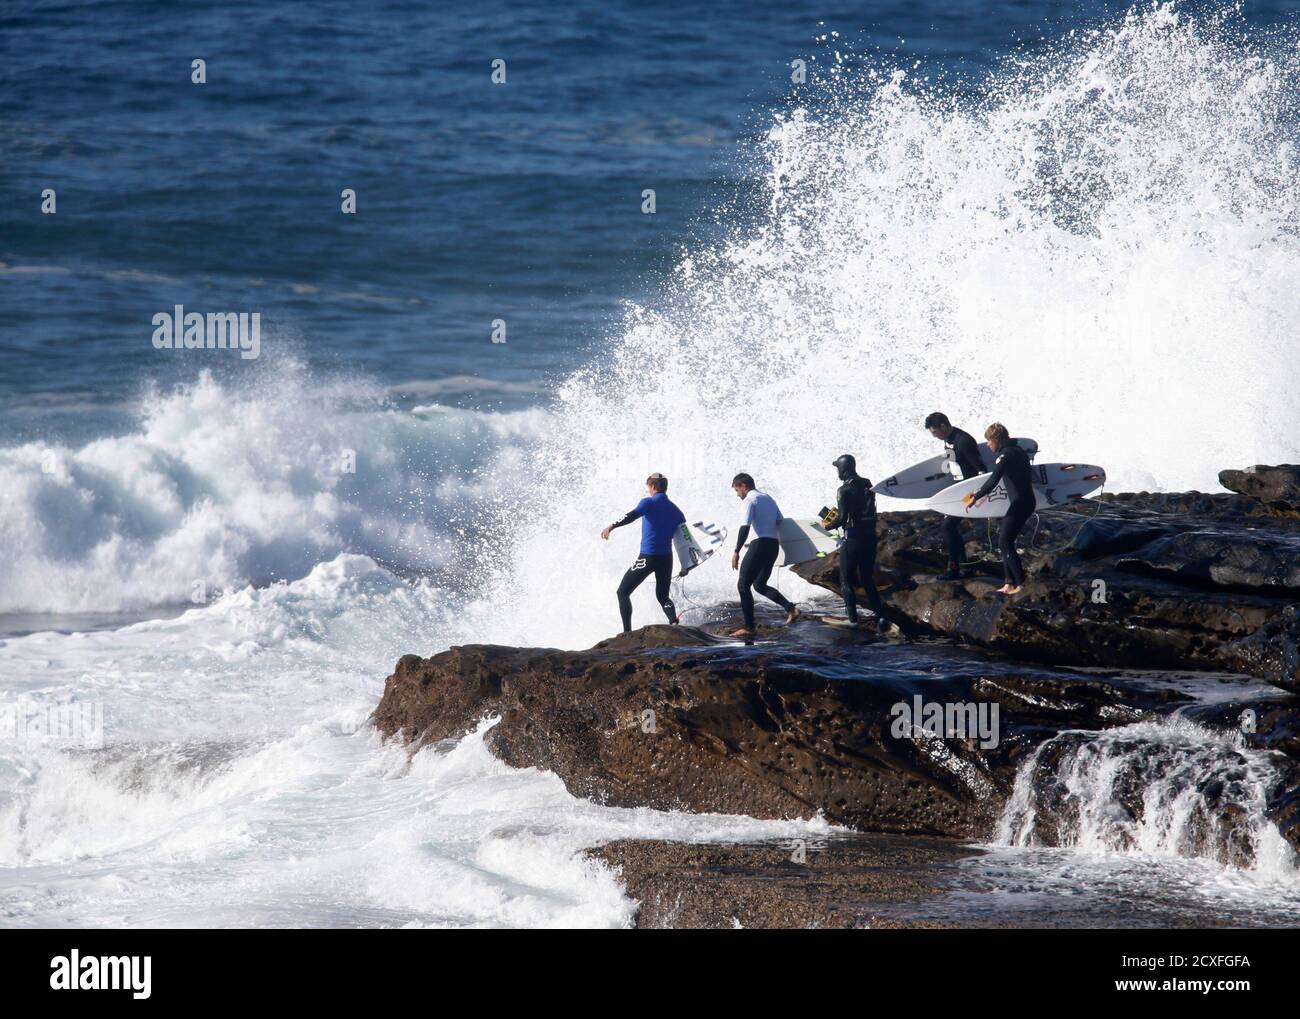 Competitors In The Inaugural Red Bull Cape Fear Invitational Surfing Tournament Step Across The Rocky Shoreline